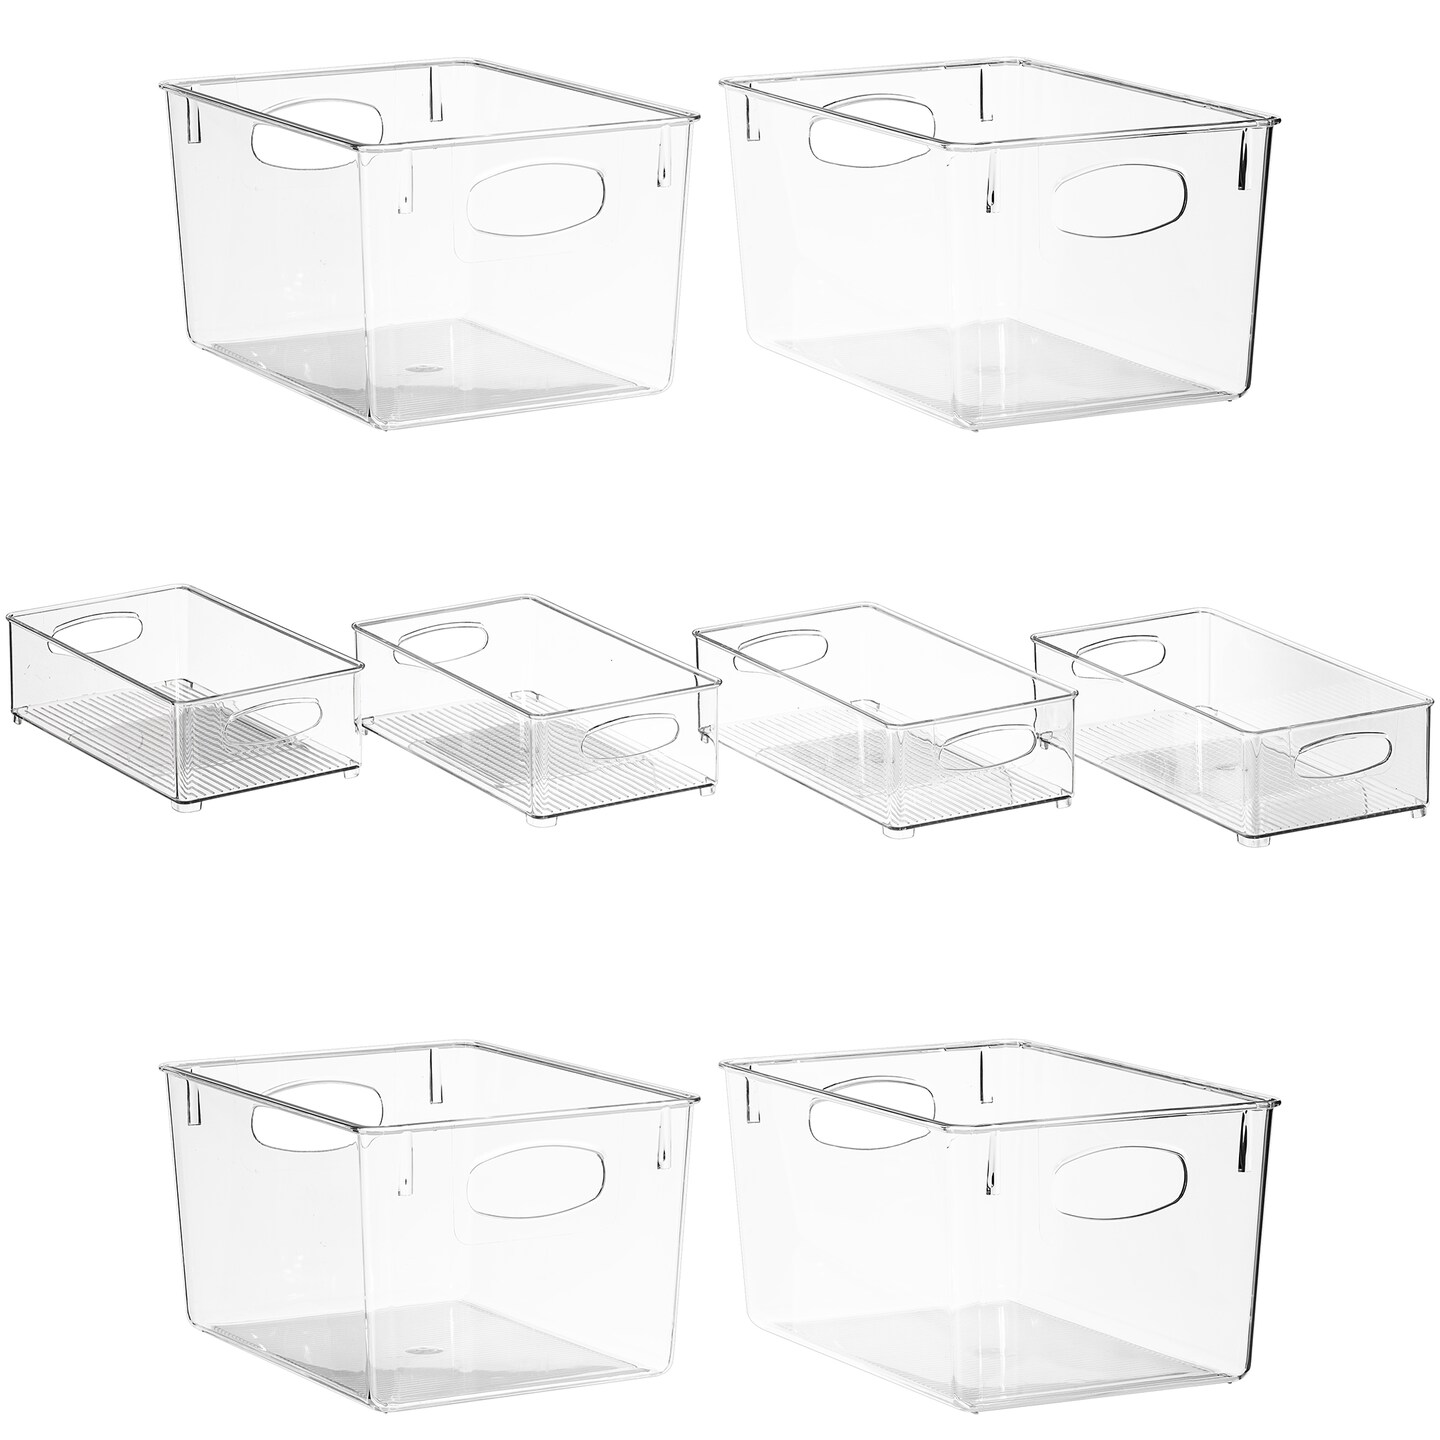 Set of 8, Stackable Clear Bins with Removable Dividers - Food Snack  Organizer, Pantry Organization and Storage - Plastic Home Containers -  Refrigerator, Fridge, Kitchen Cabinet Organizing Bins 